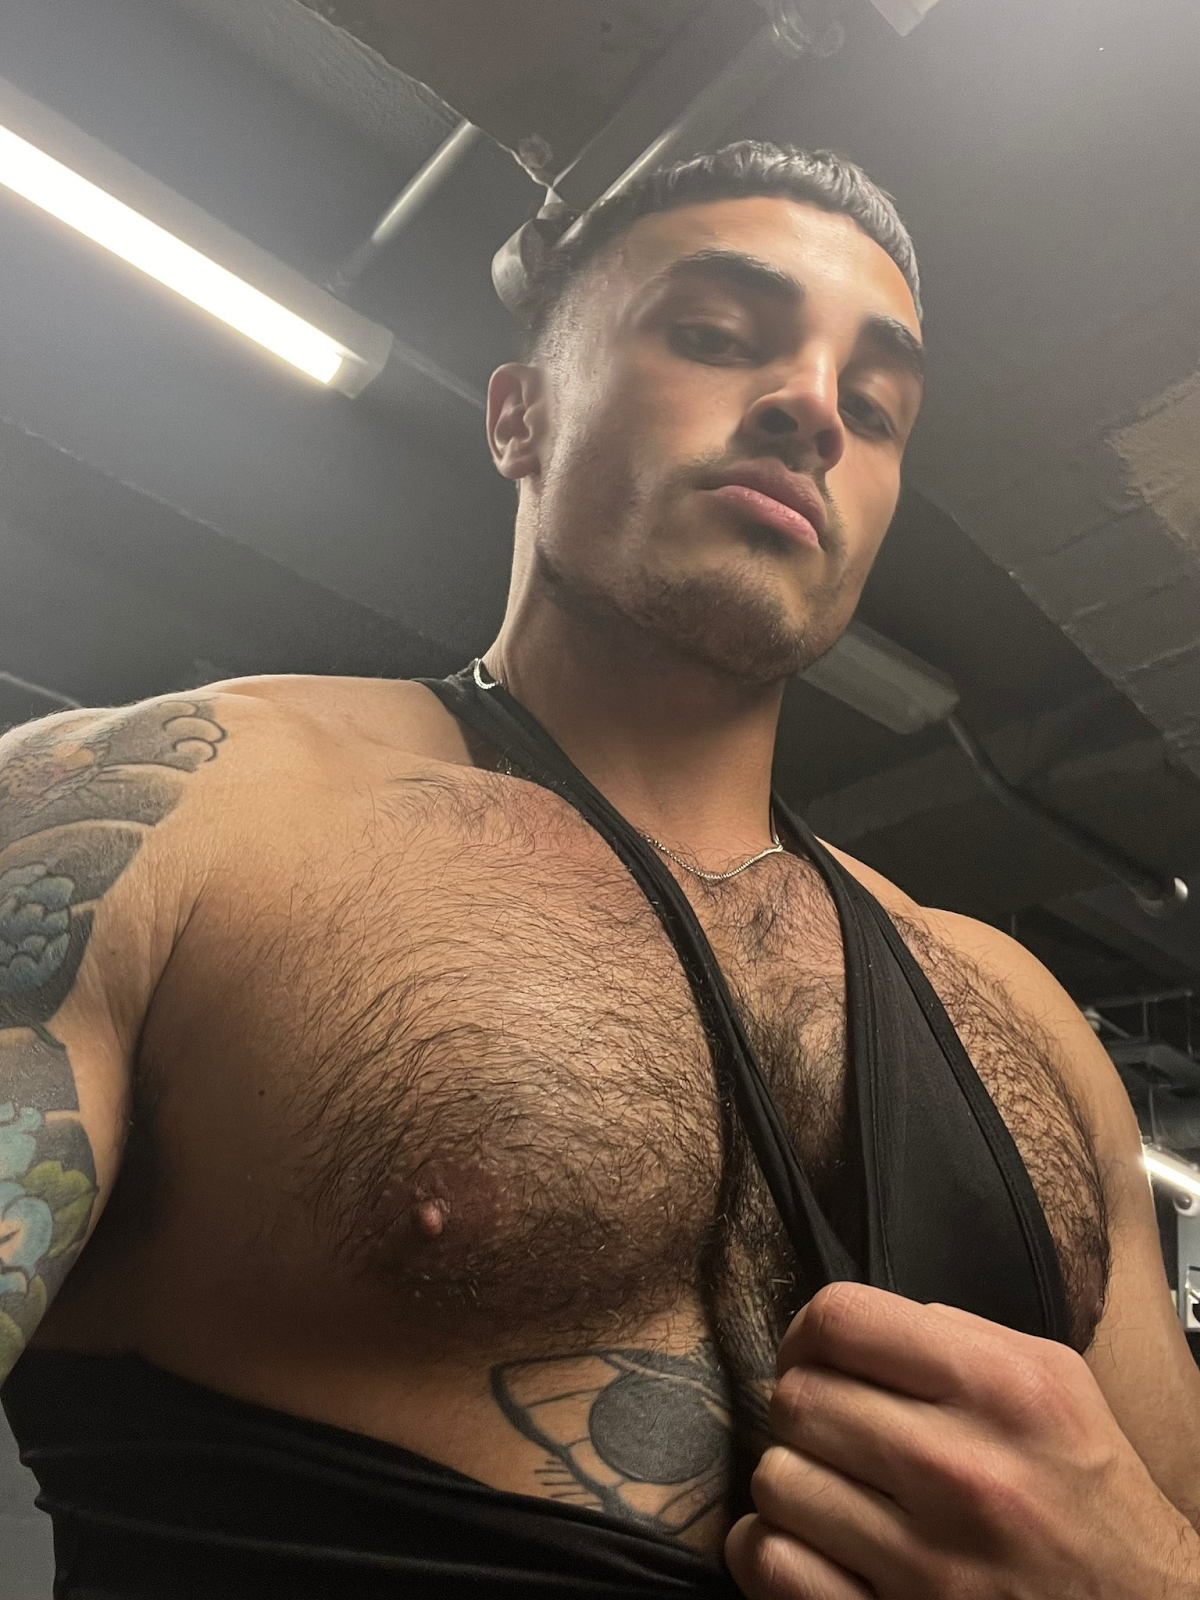 Nick_at_Night at the gym pulling down his black tank top to reveal his gay hairy nipples and chest tattoos